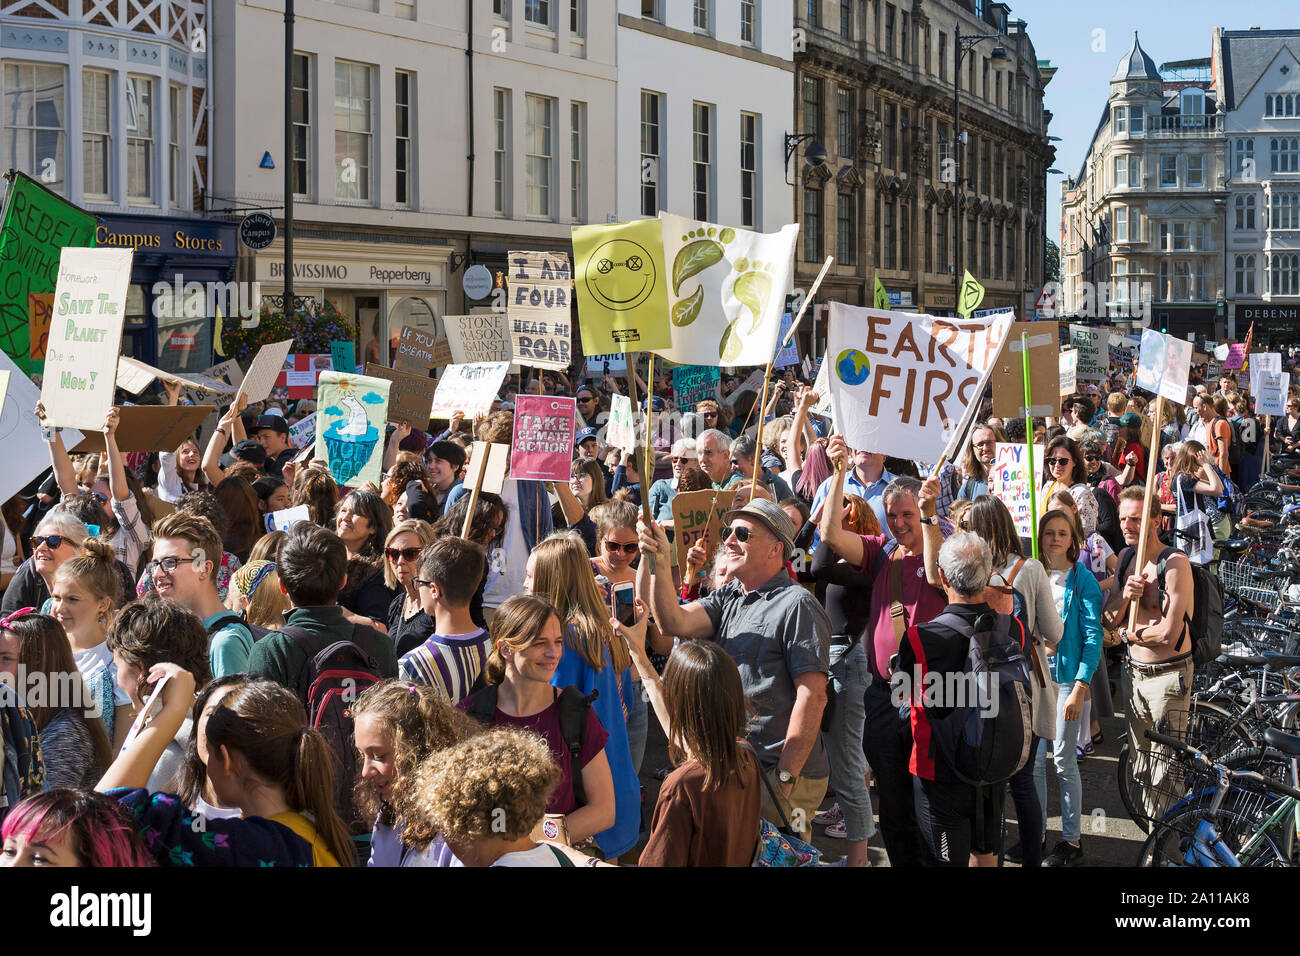 Global climate strike, protest for climate change action, Oxford, England, UK, Friday 20 September 2019 Stock Photo